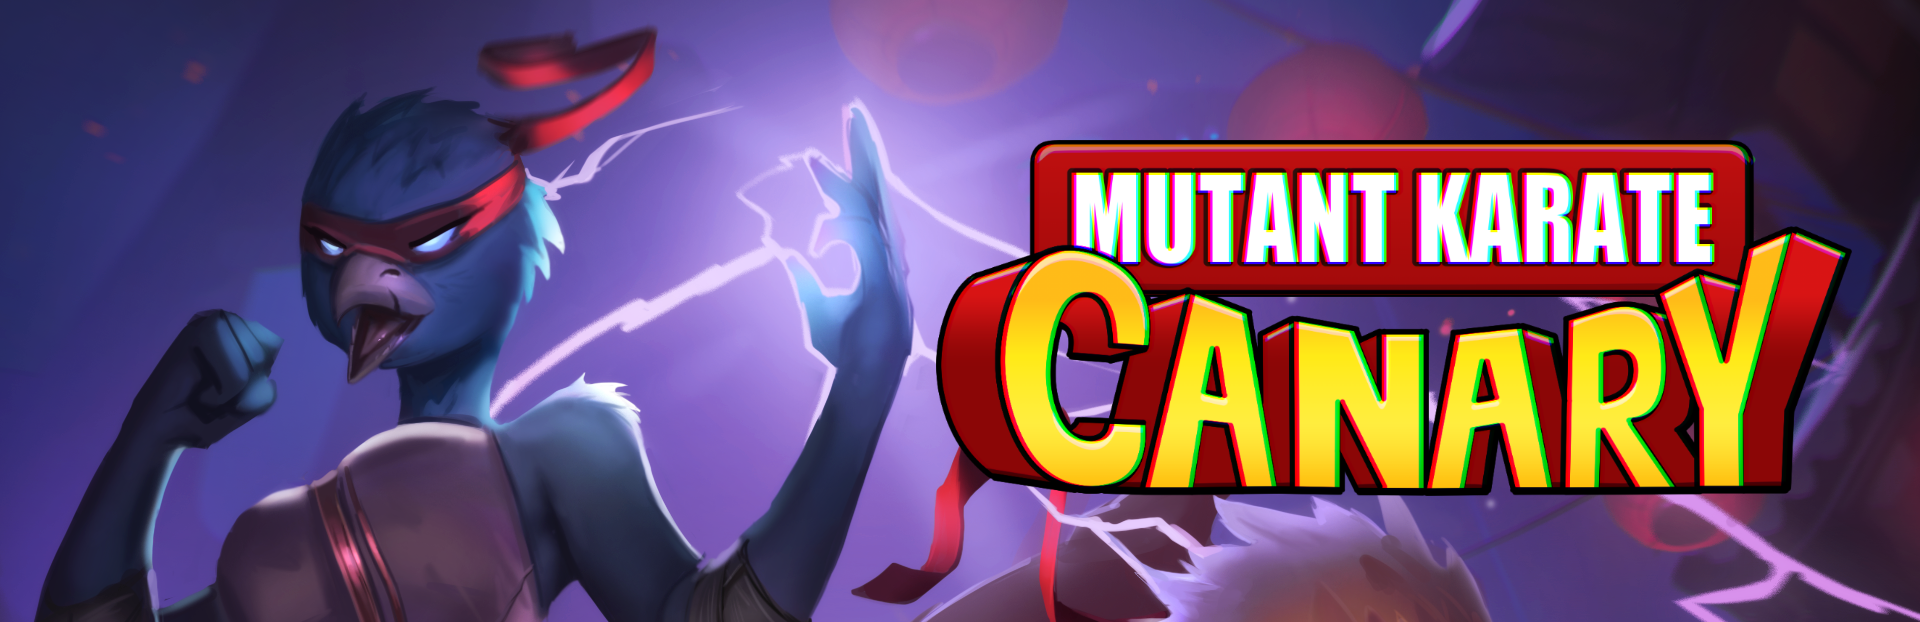 Mutant Karate Canary - The turn-based, deck builder.